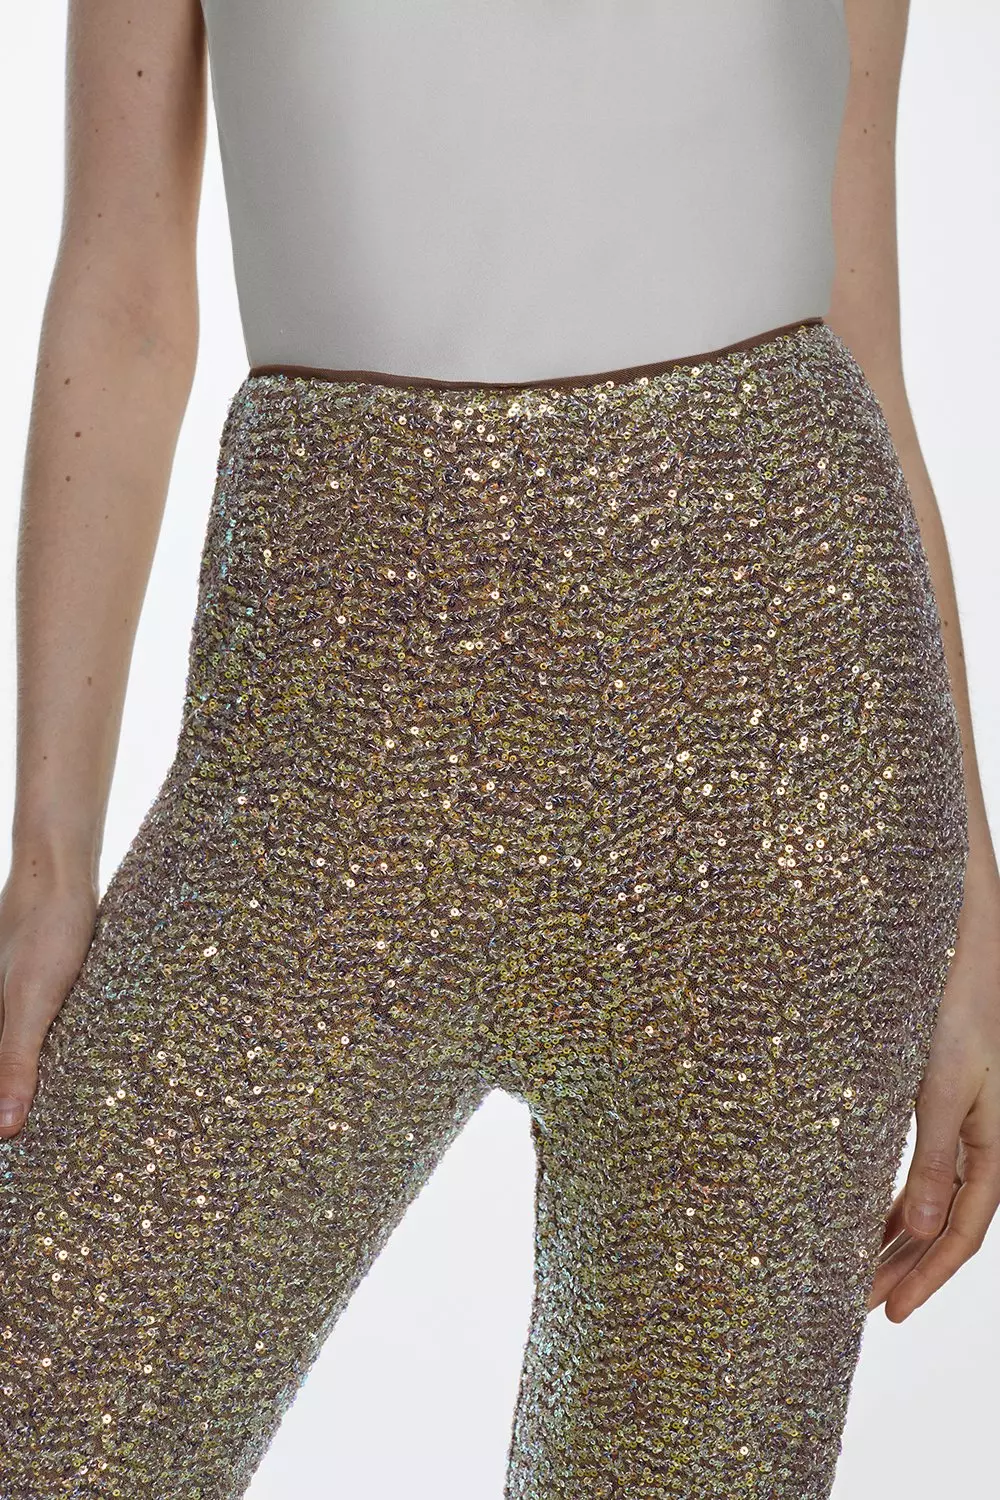 Express High Waisted Sequin Leggings  Sequin leggings, Clothes, Colorful  leggings